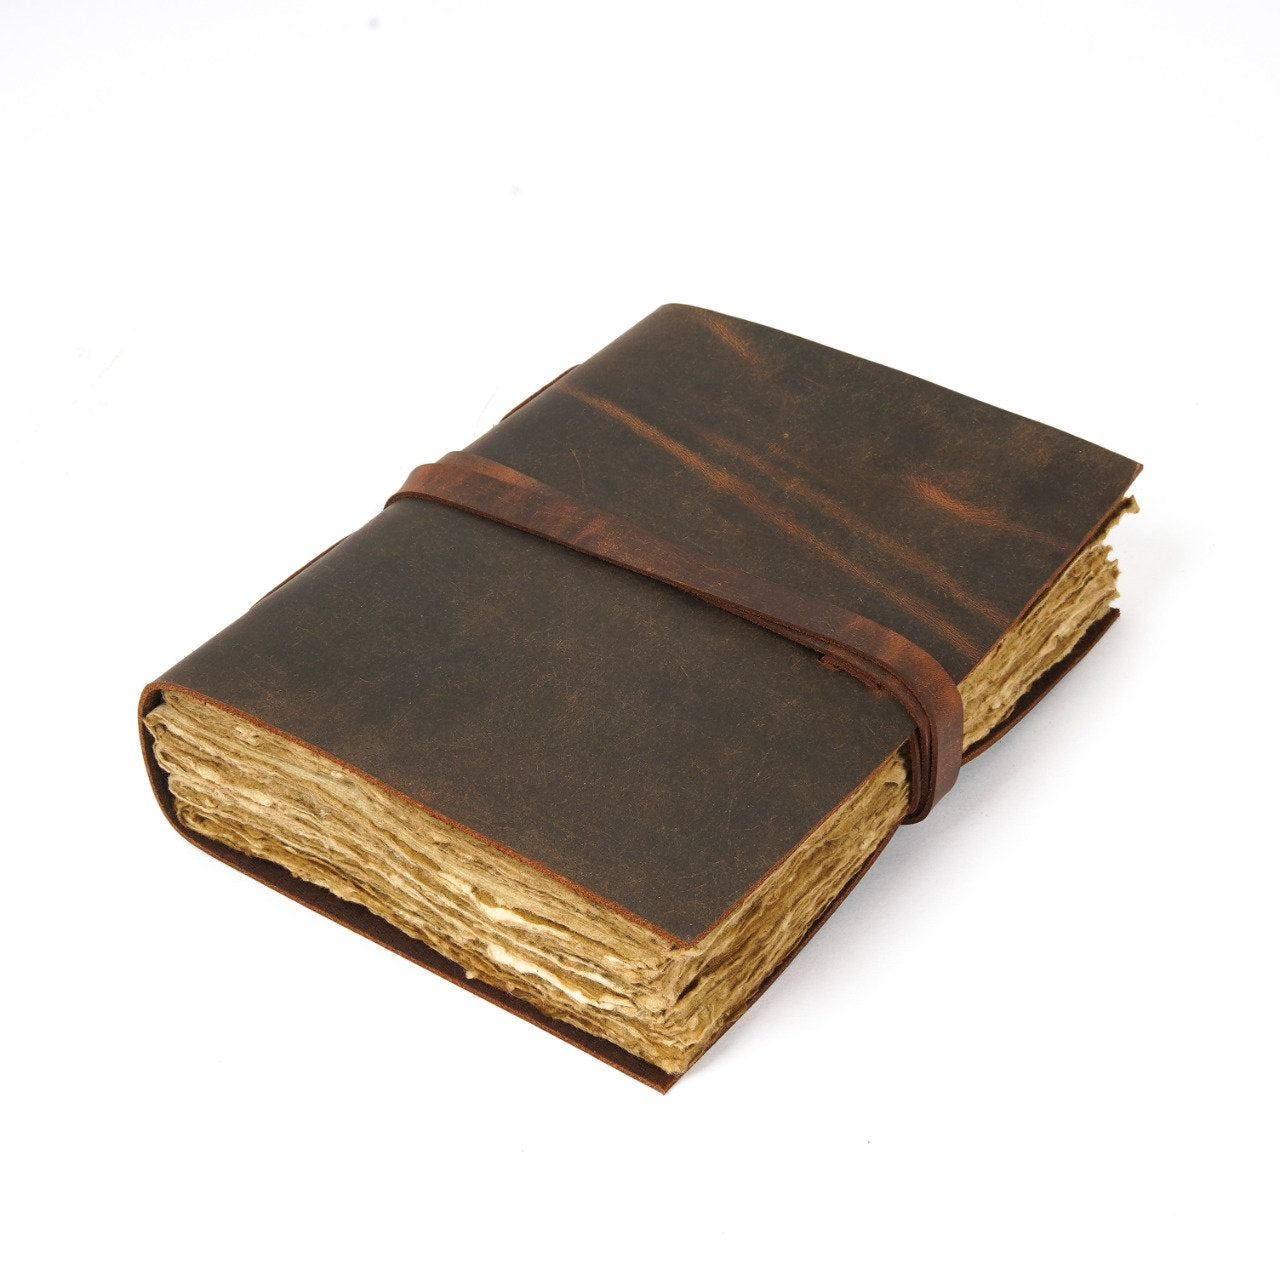 Vintage Leather Journal Book - A4 size.